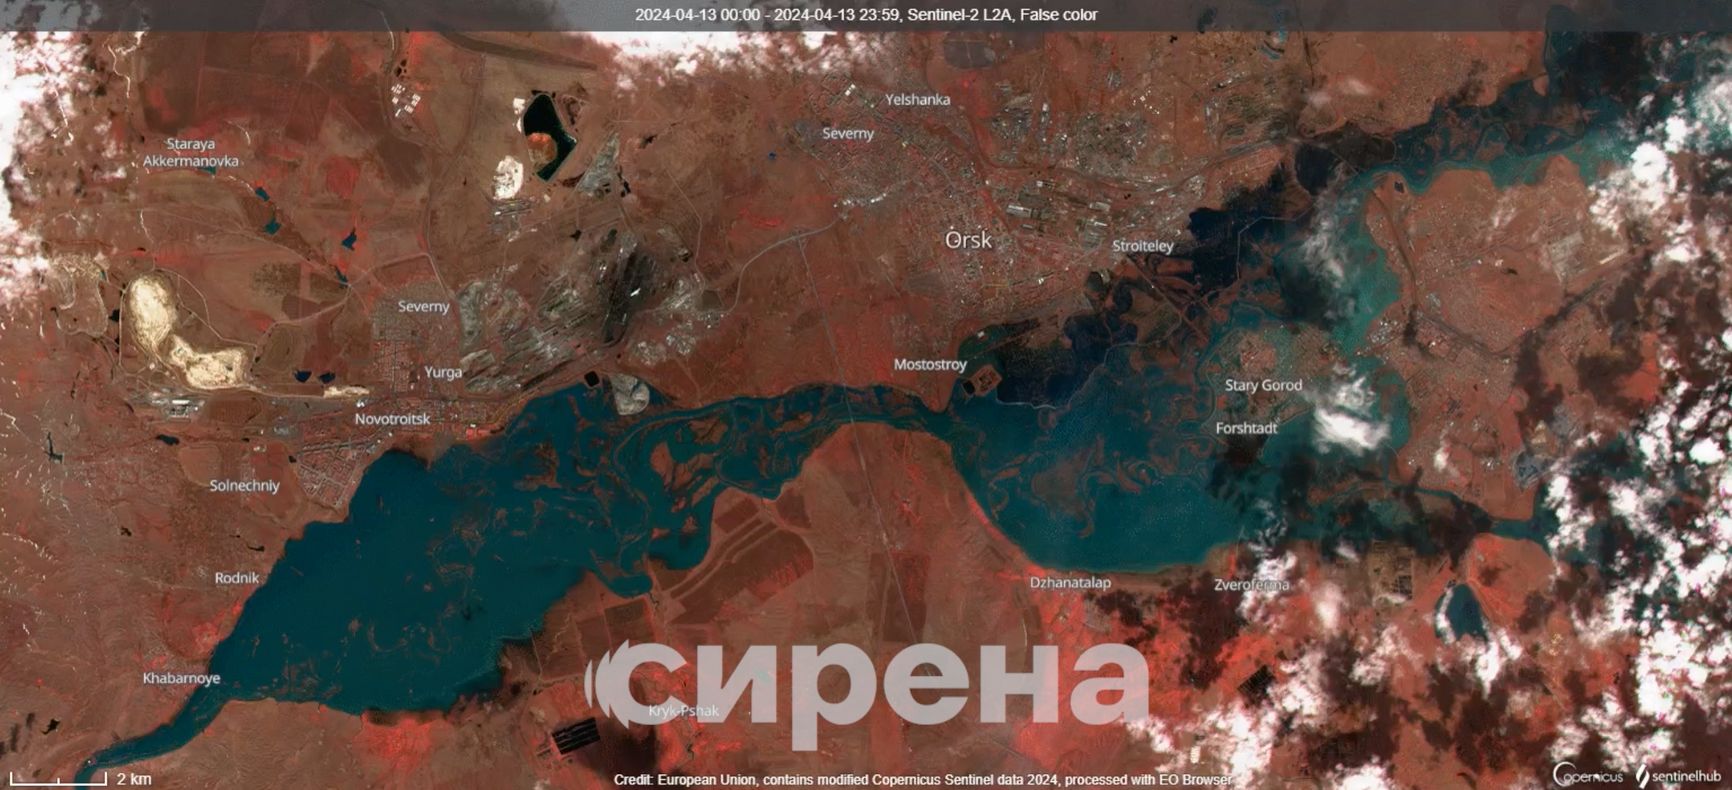 Satellite imagery of Orsk and the surrounding area on April 14, 2024 — 9 days after the dam broke